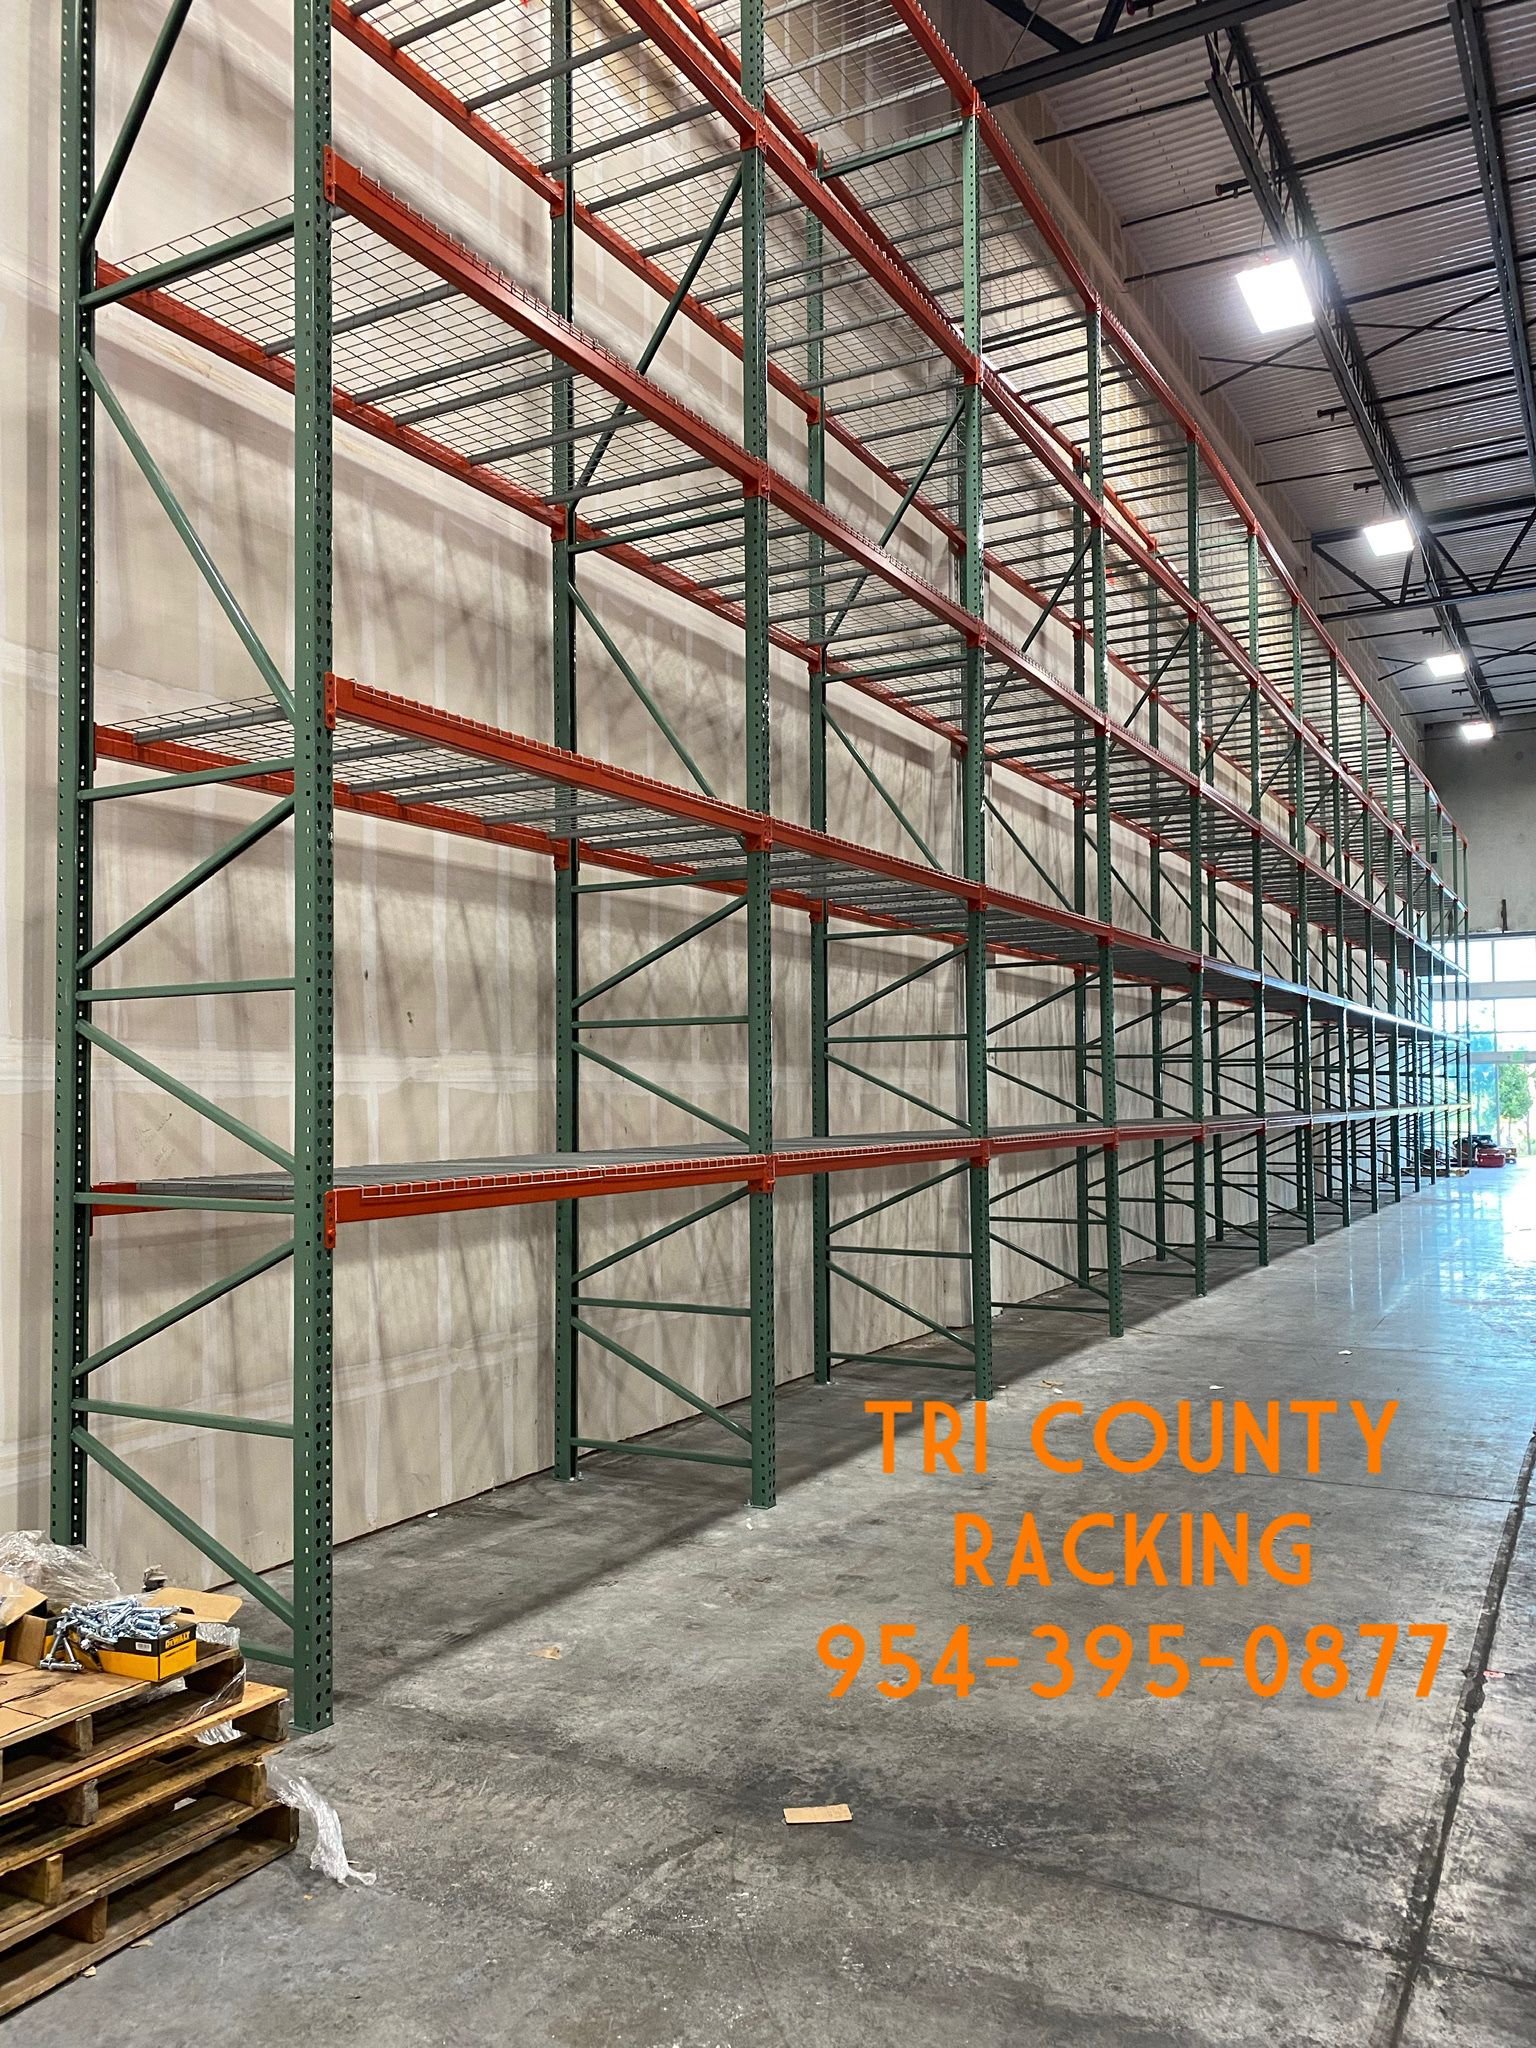 Brand New 42”x46” Wire Decks Made In USA Pallet Racks Beams Uprights Wire Decks Export Forklifts Install Delivery 